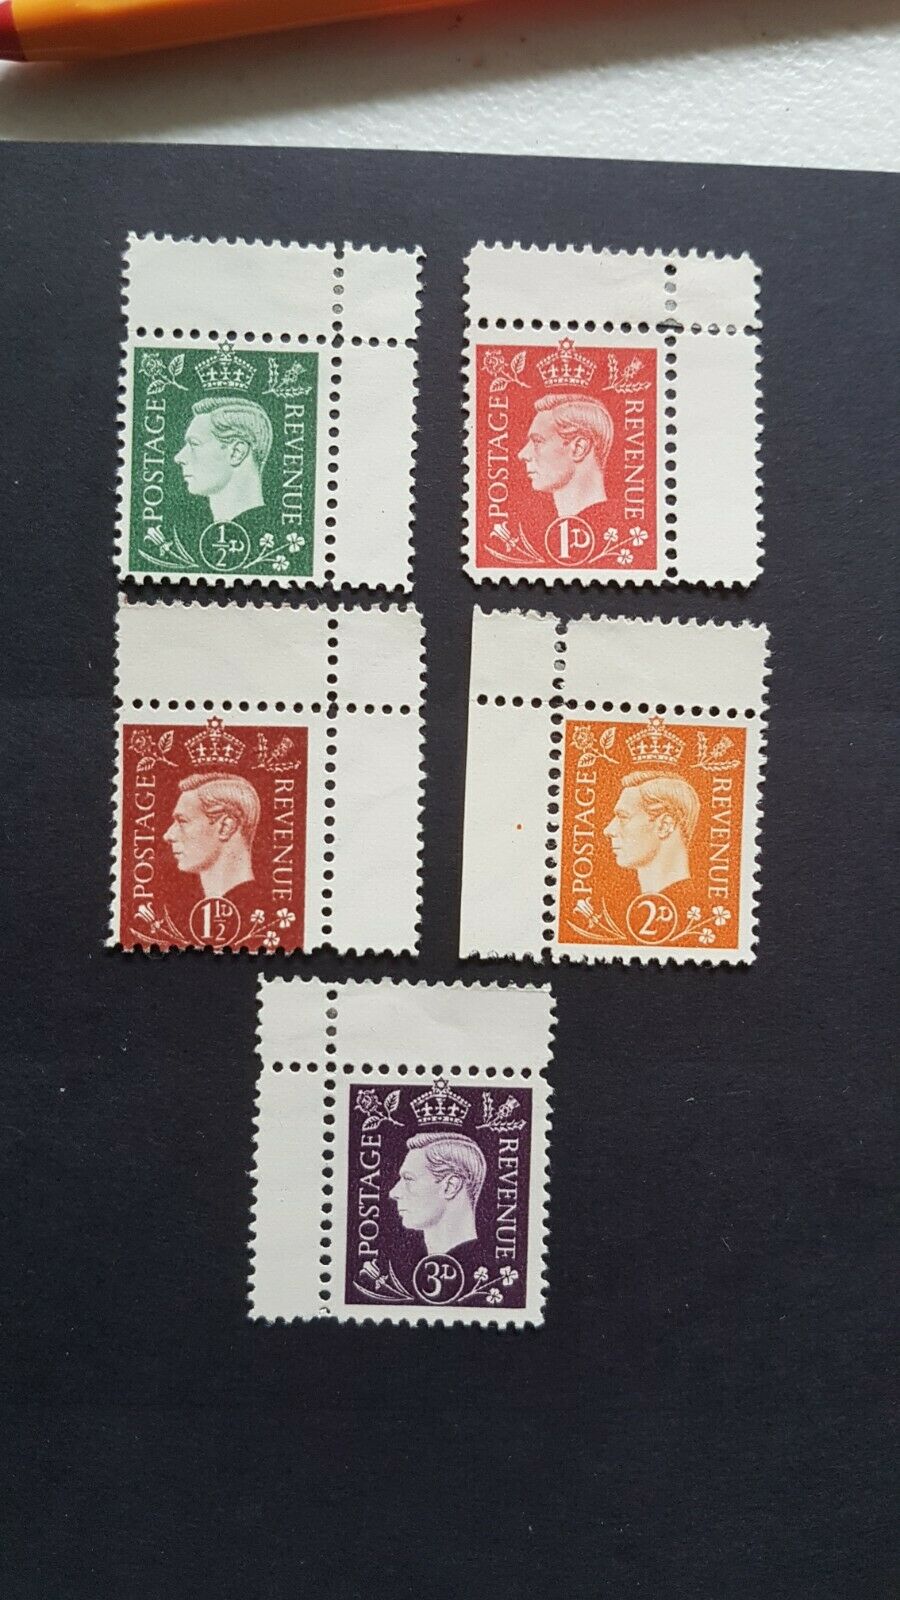 Germany WW2 forgeries of GB KGVl definitives on watermarked paper M